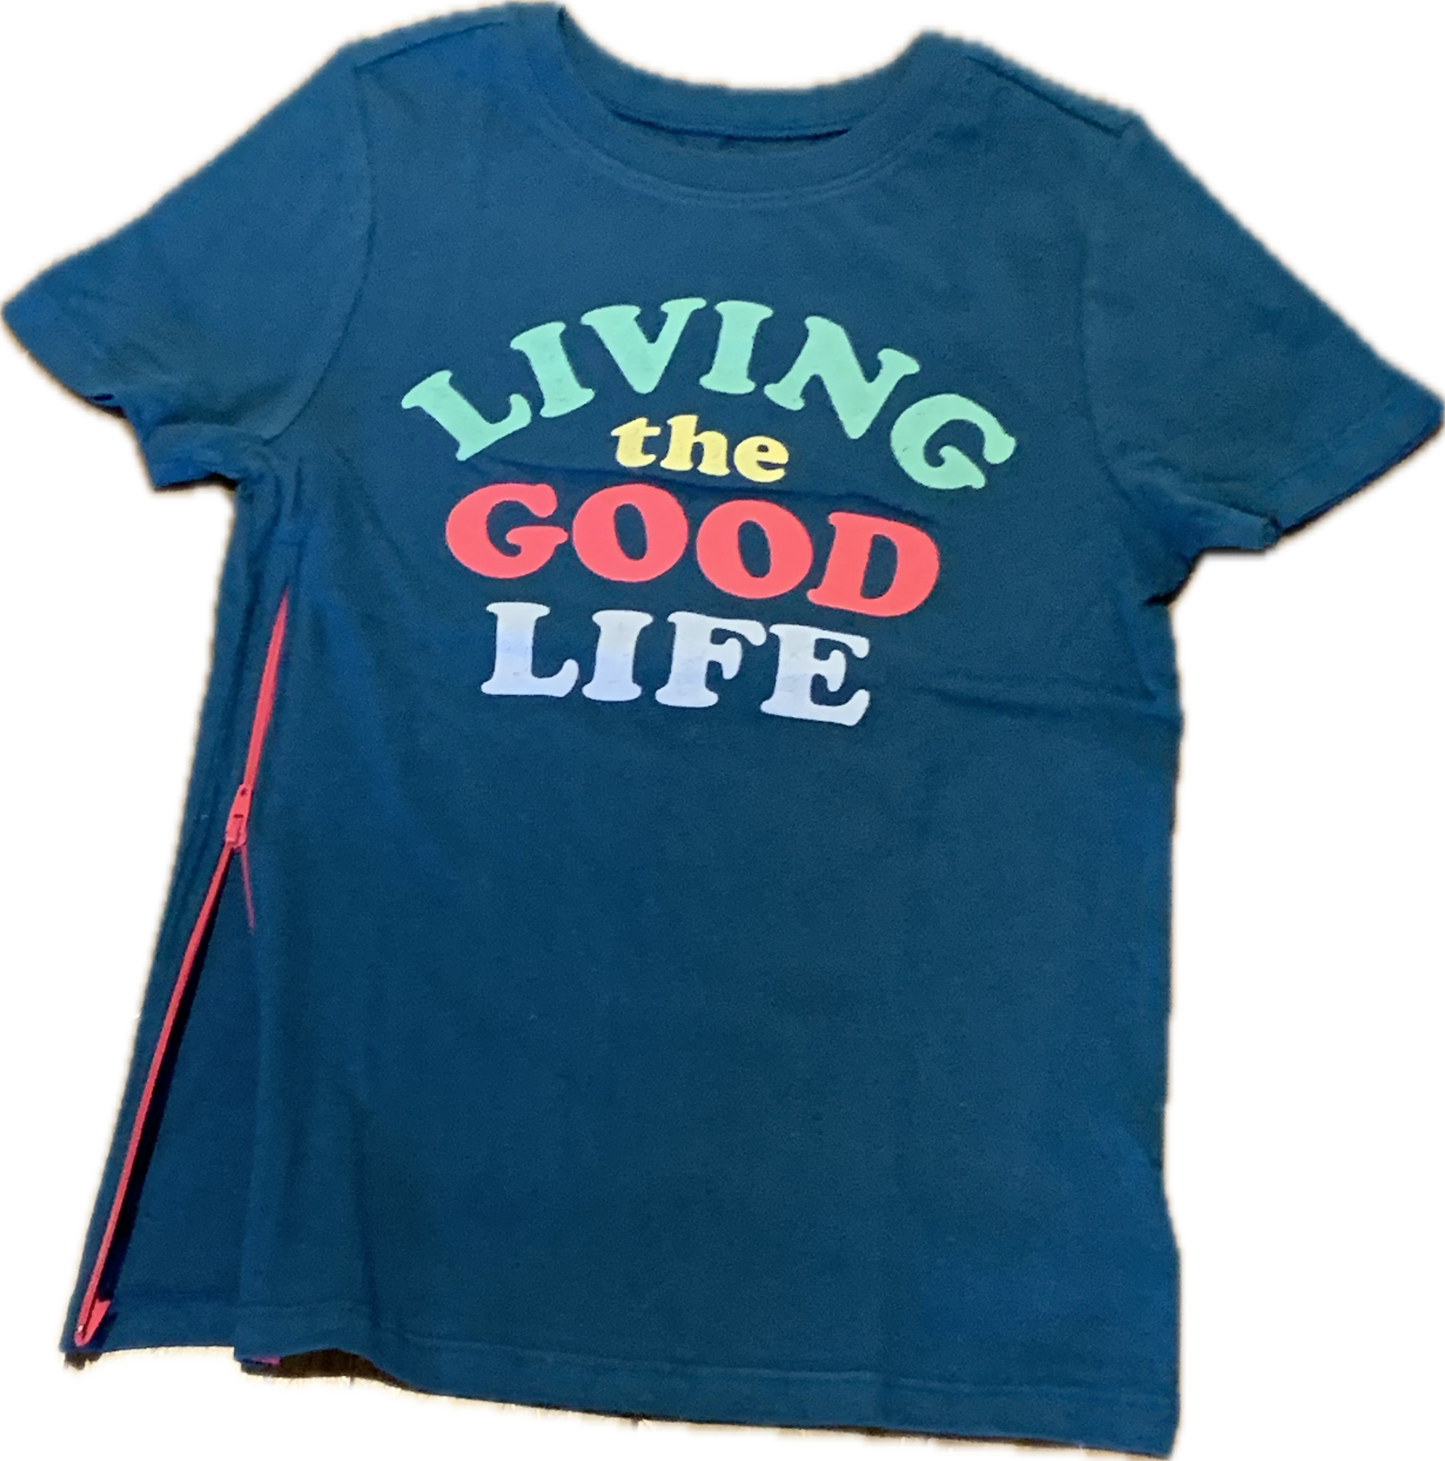 SIDE ZIPPER Living the Good Life Size 5T